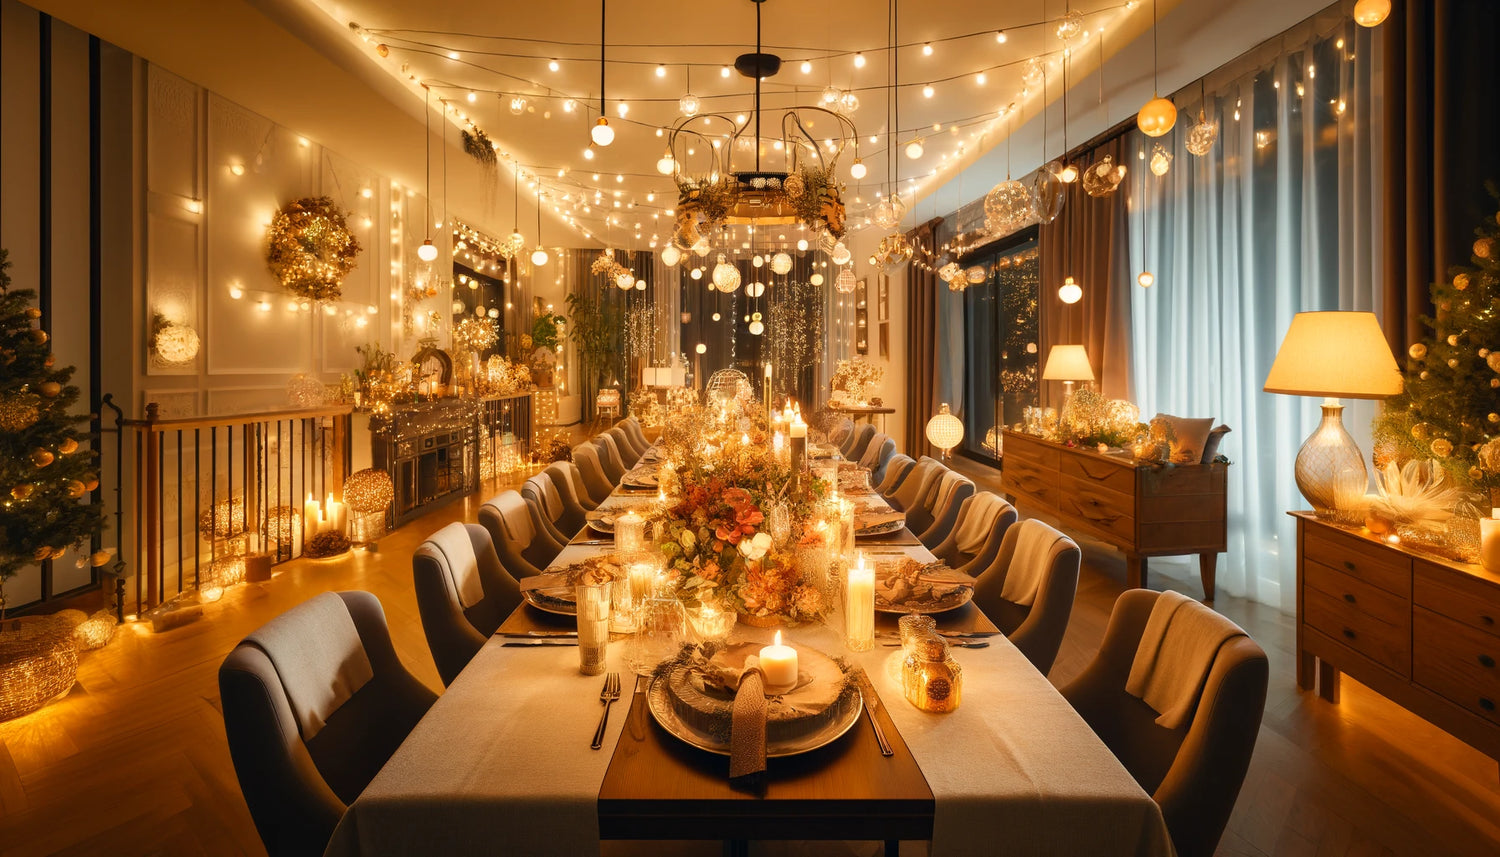 The Art of Choosing the Right Light for Special Events and Celebrations at Home